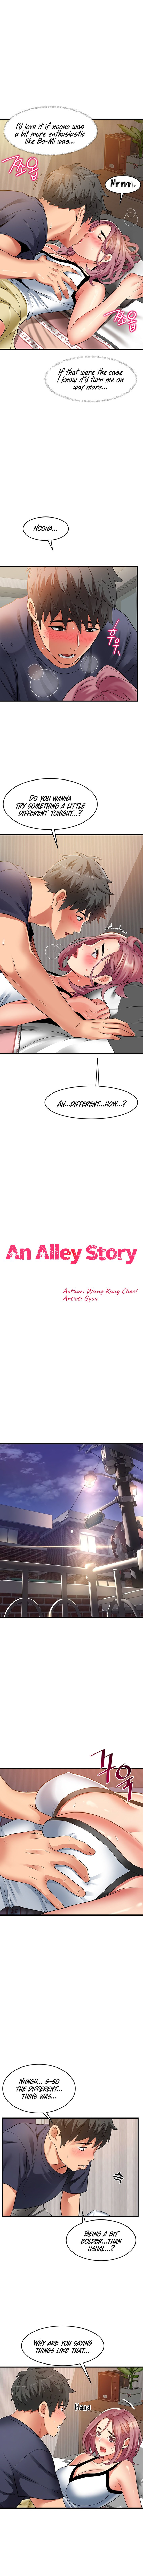 an-alley-story-chap-25-1